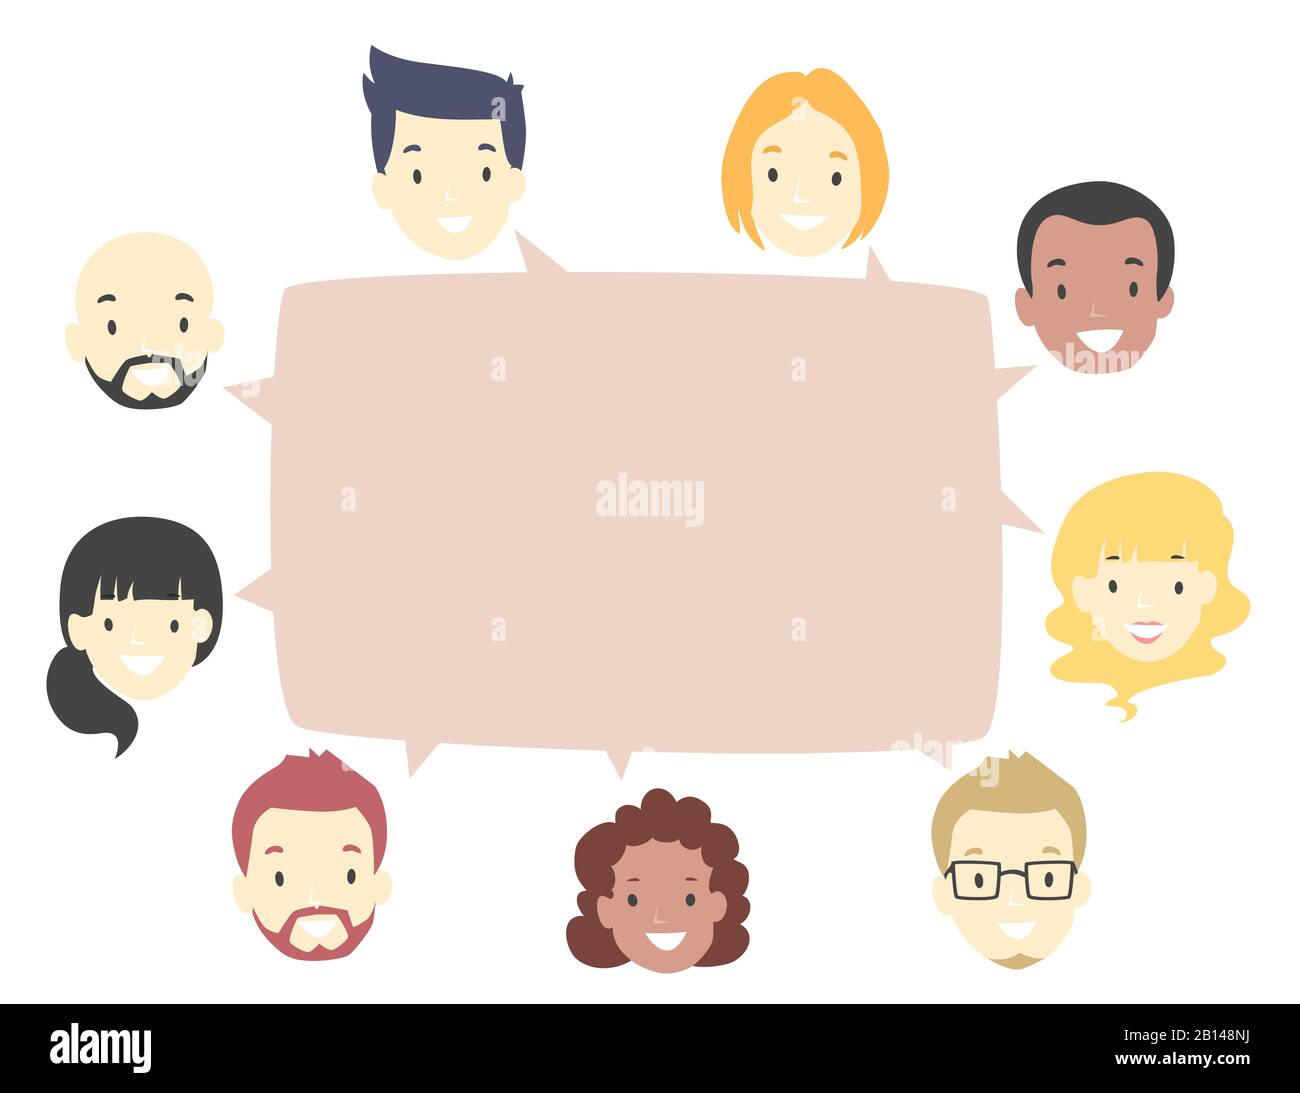 Illustration of Diverse Group of Man and Woman Head Around a Big Speech Bubble Stock Photo